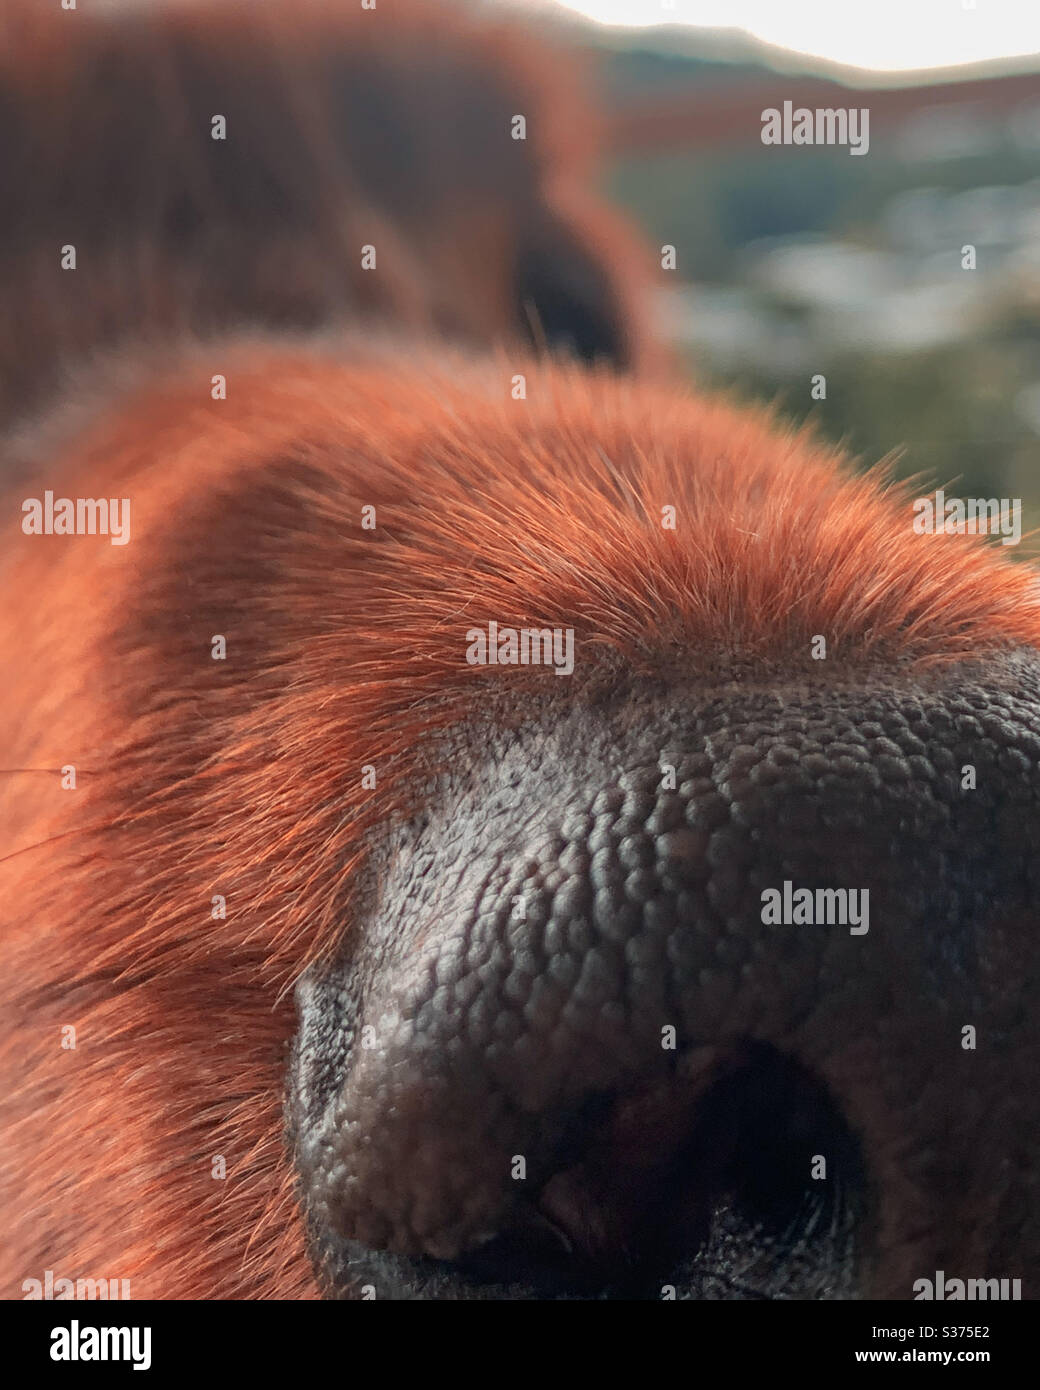 The nose closeup , macro of an red Irish Setter dog’s nose, glowing and hairy, perspective Stock Photo